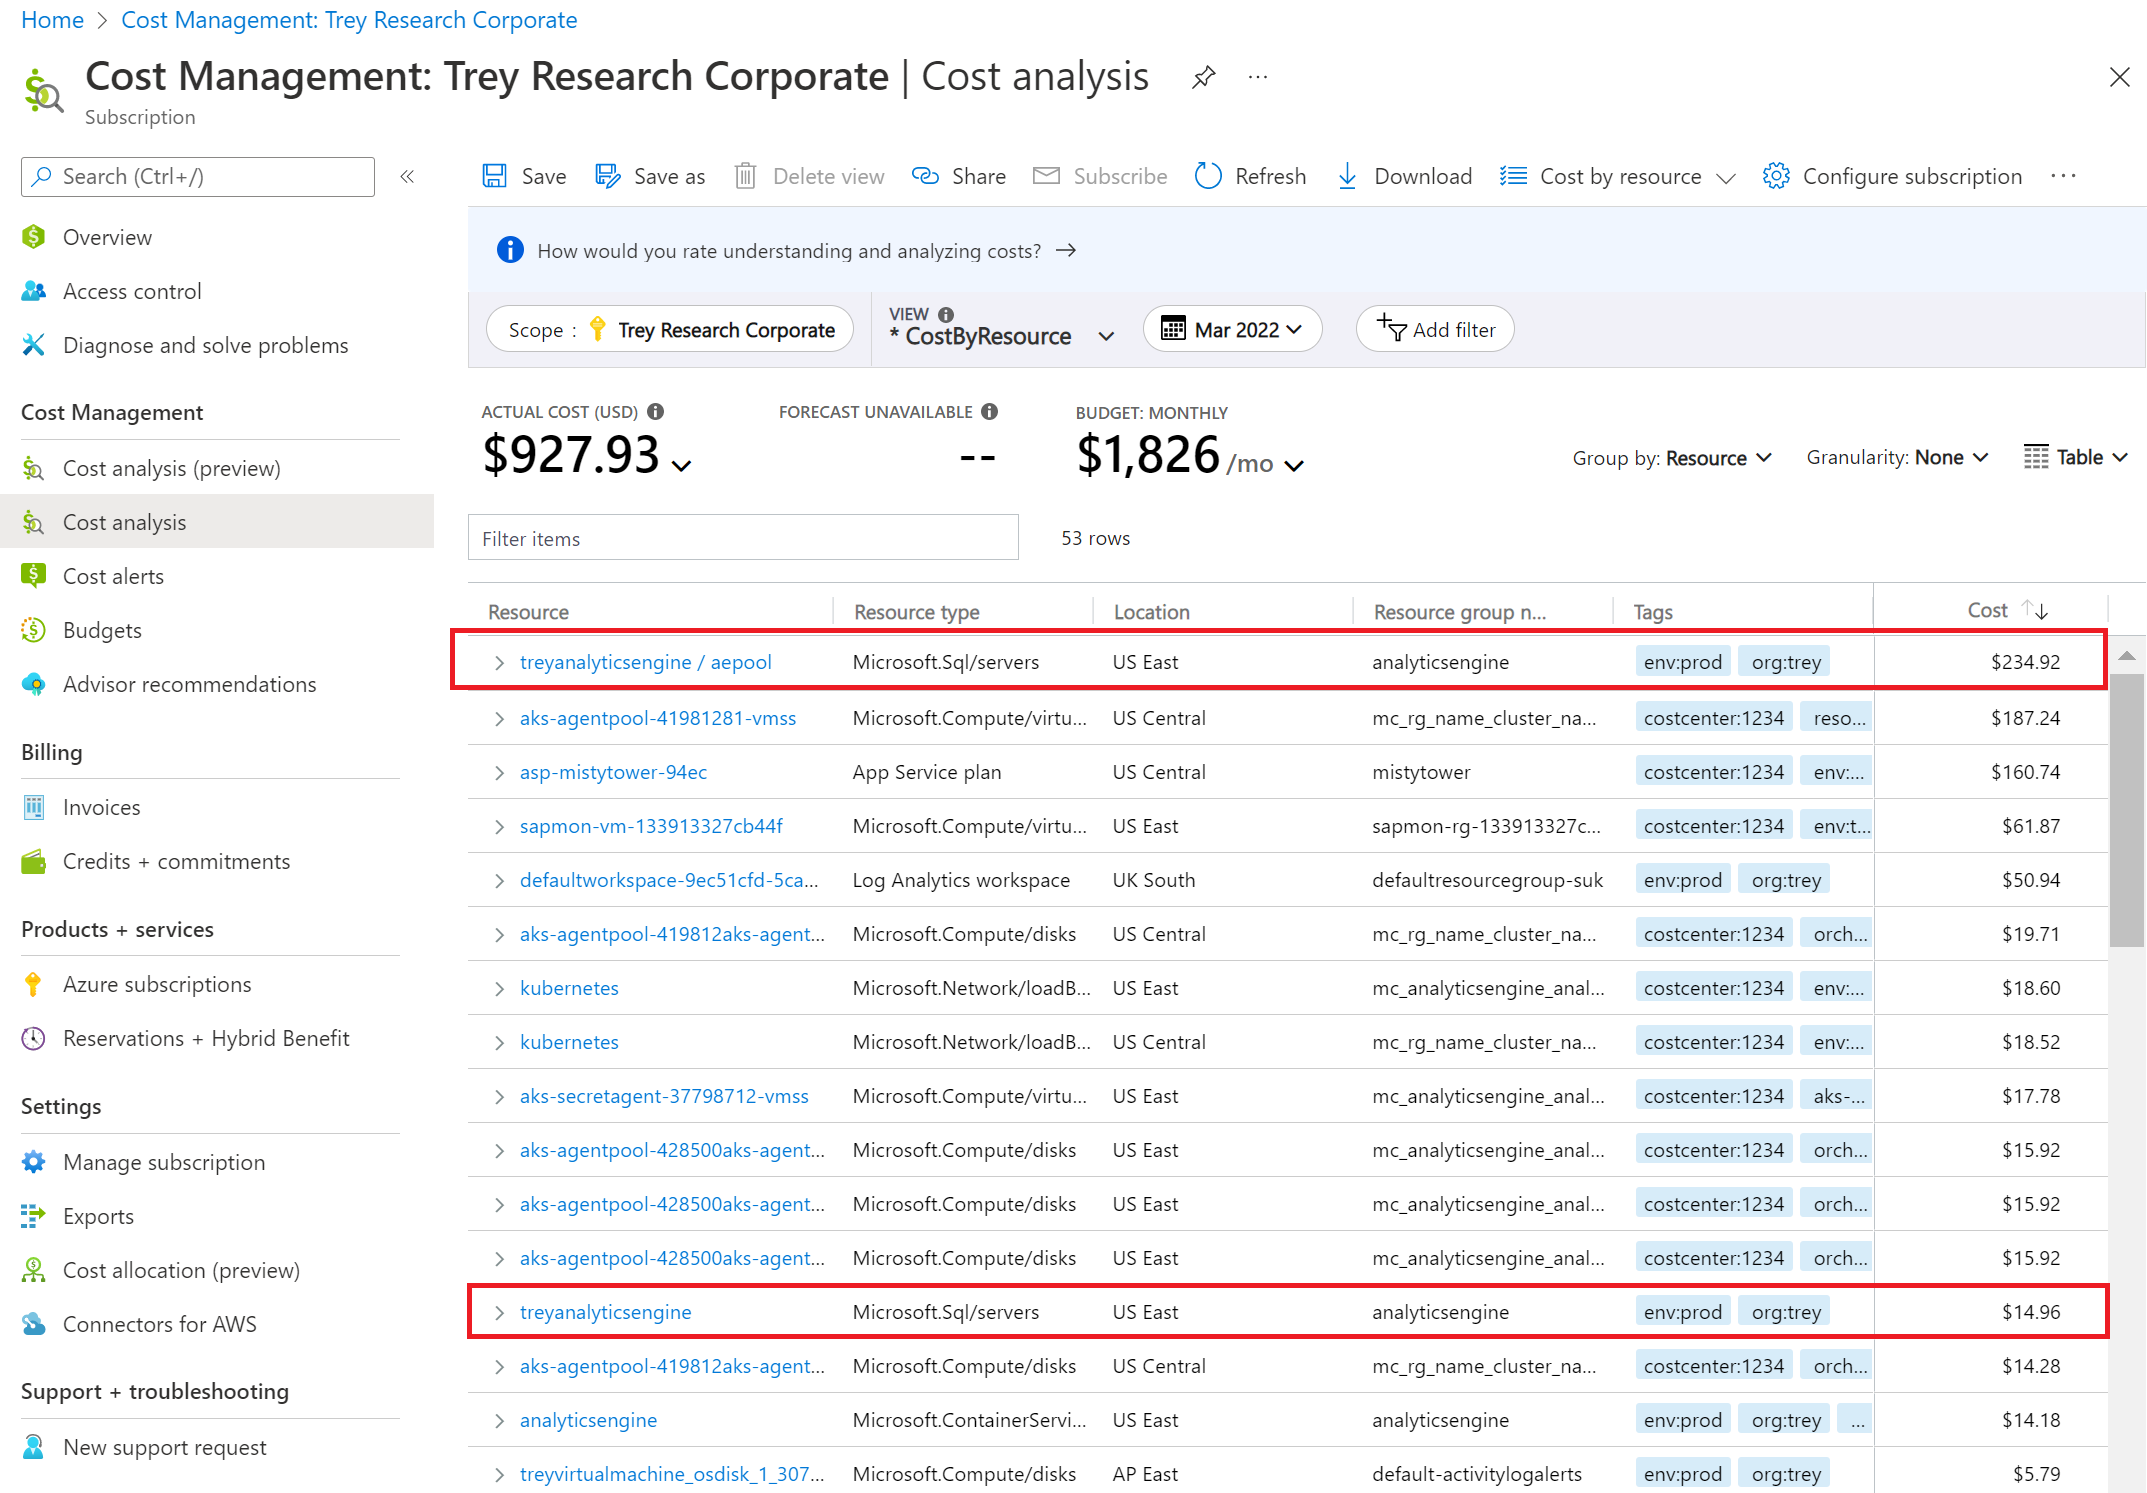 Screenshot showing classic cost analysis where multiple related resource costs aren't grouped.